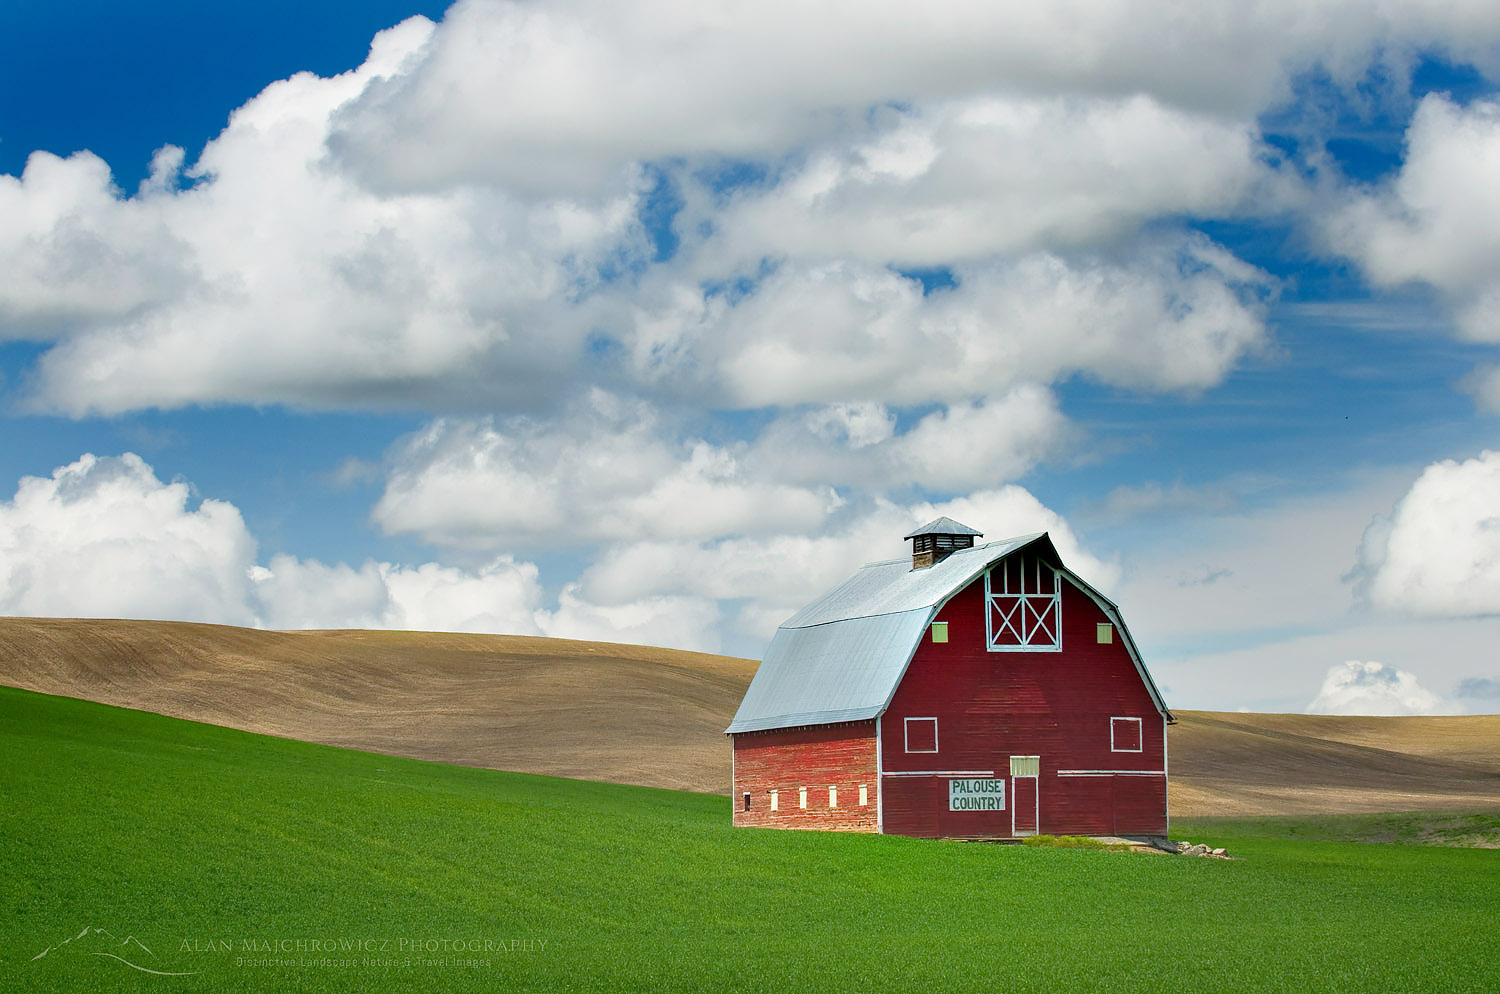 Classic red barn amidst green fields of wheat in the Plause region of Washington State #45040